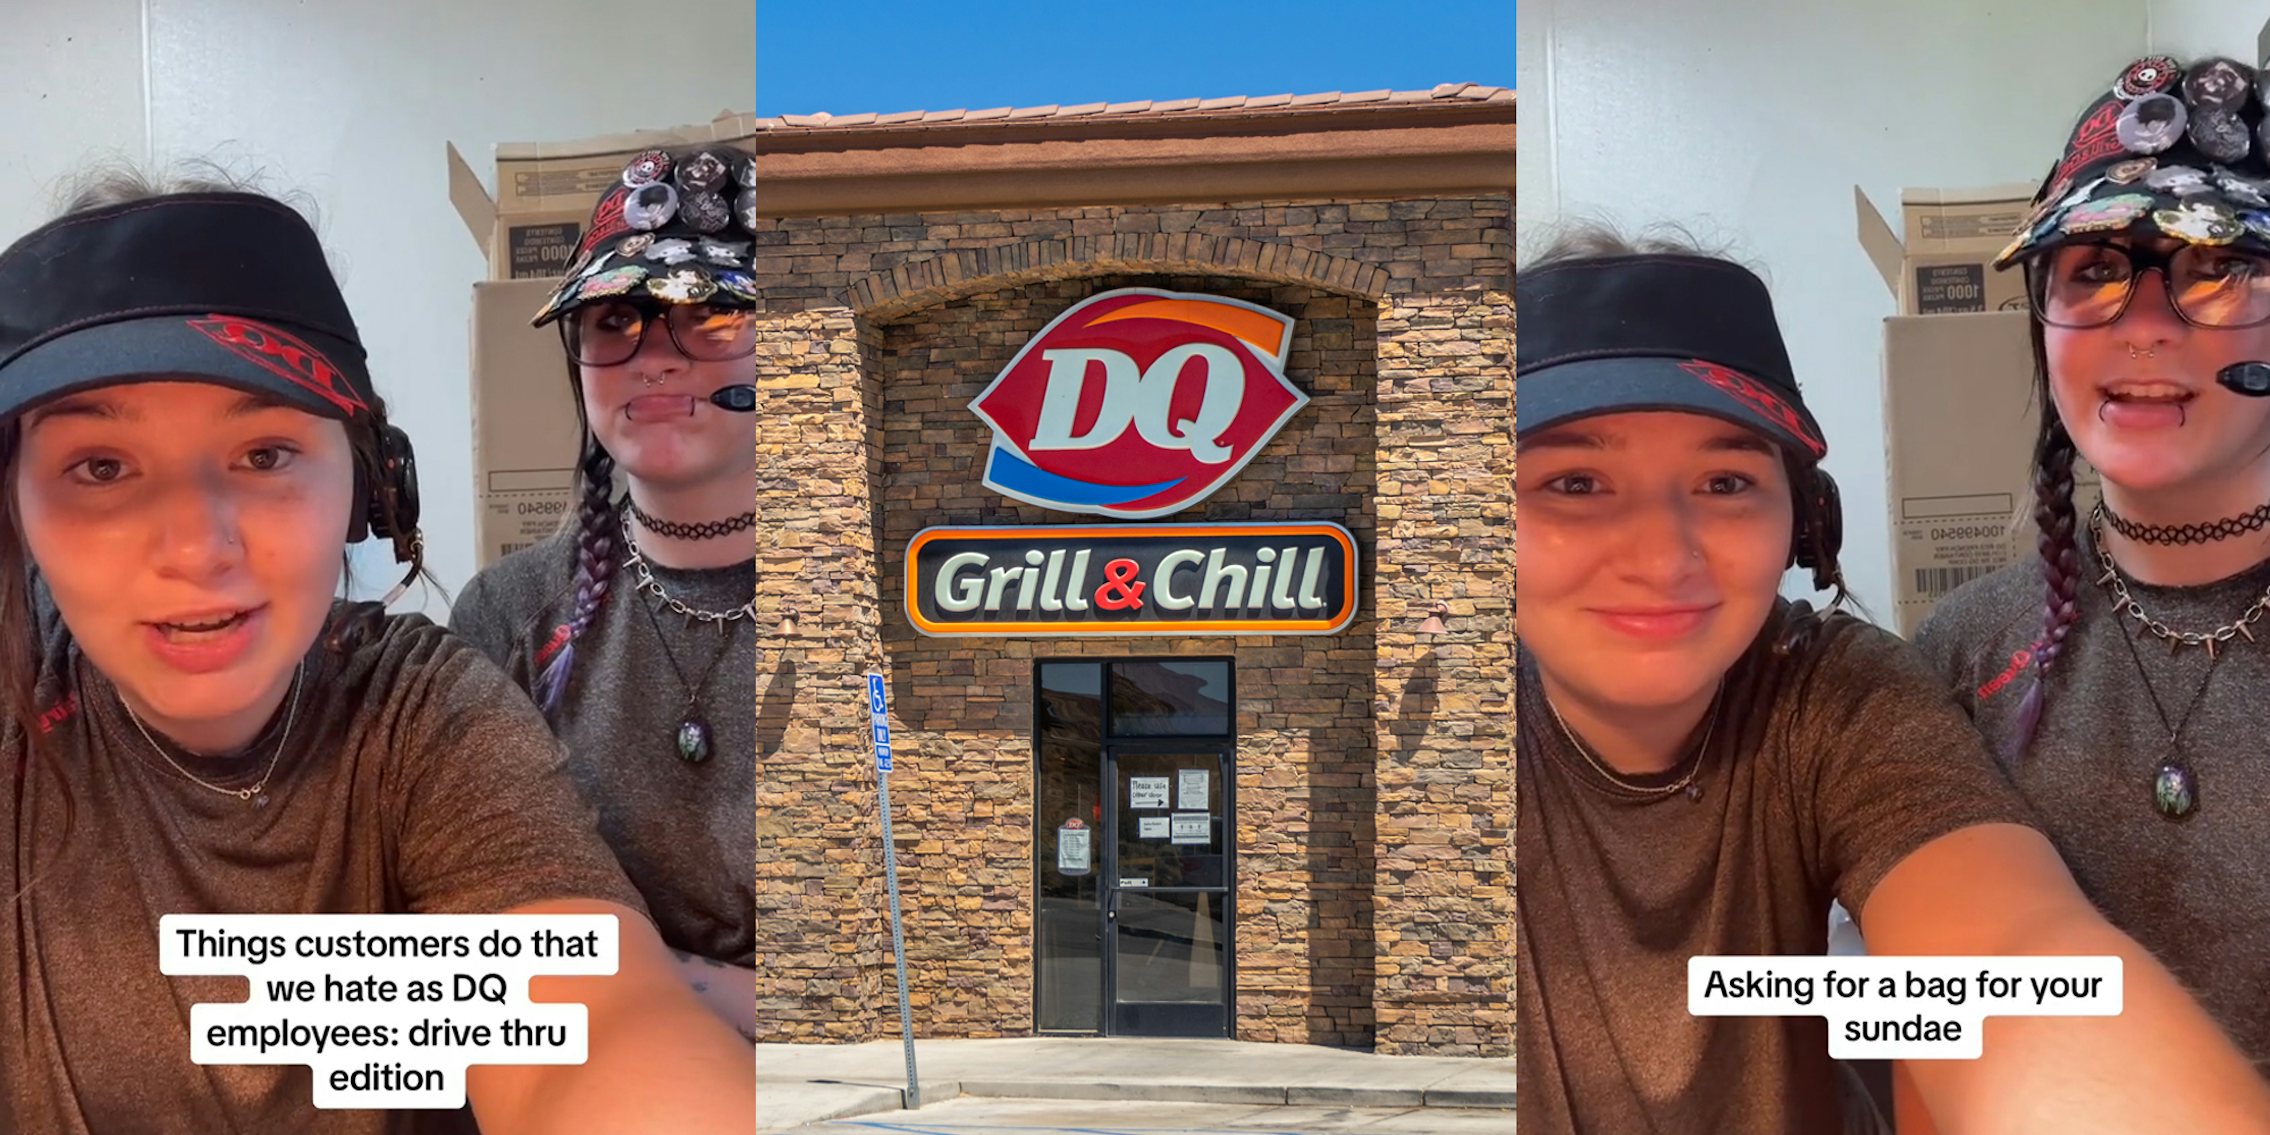 Dairy Queen employees speaking with caption 'Things customers do that we hate as DQ employees: drive thru edition' (l) Dairy Queen building entrance with sign (c) Dairy Queen employees speaking with caption 'Asking a bag for your sundae' (r)